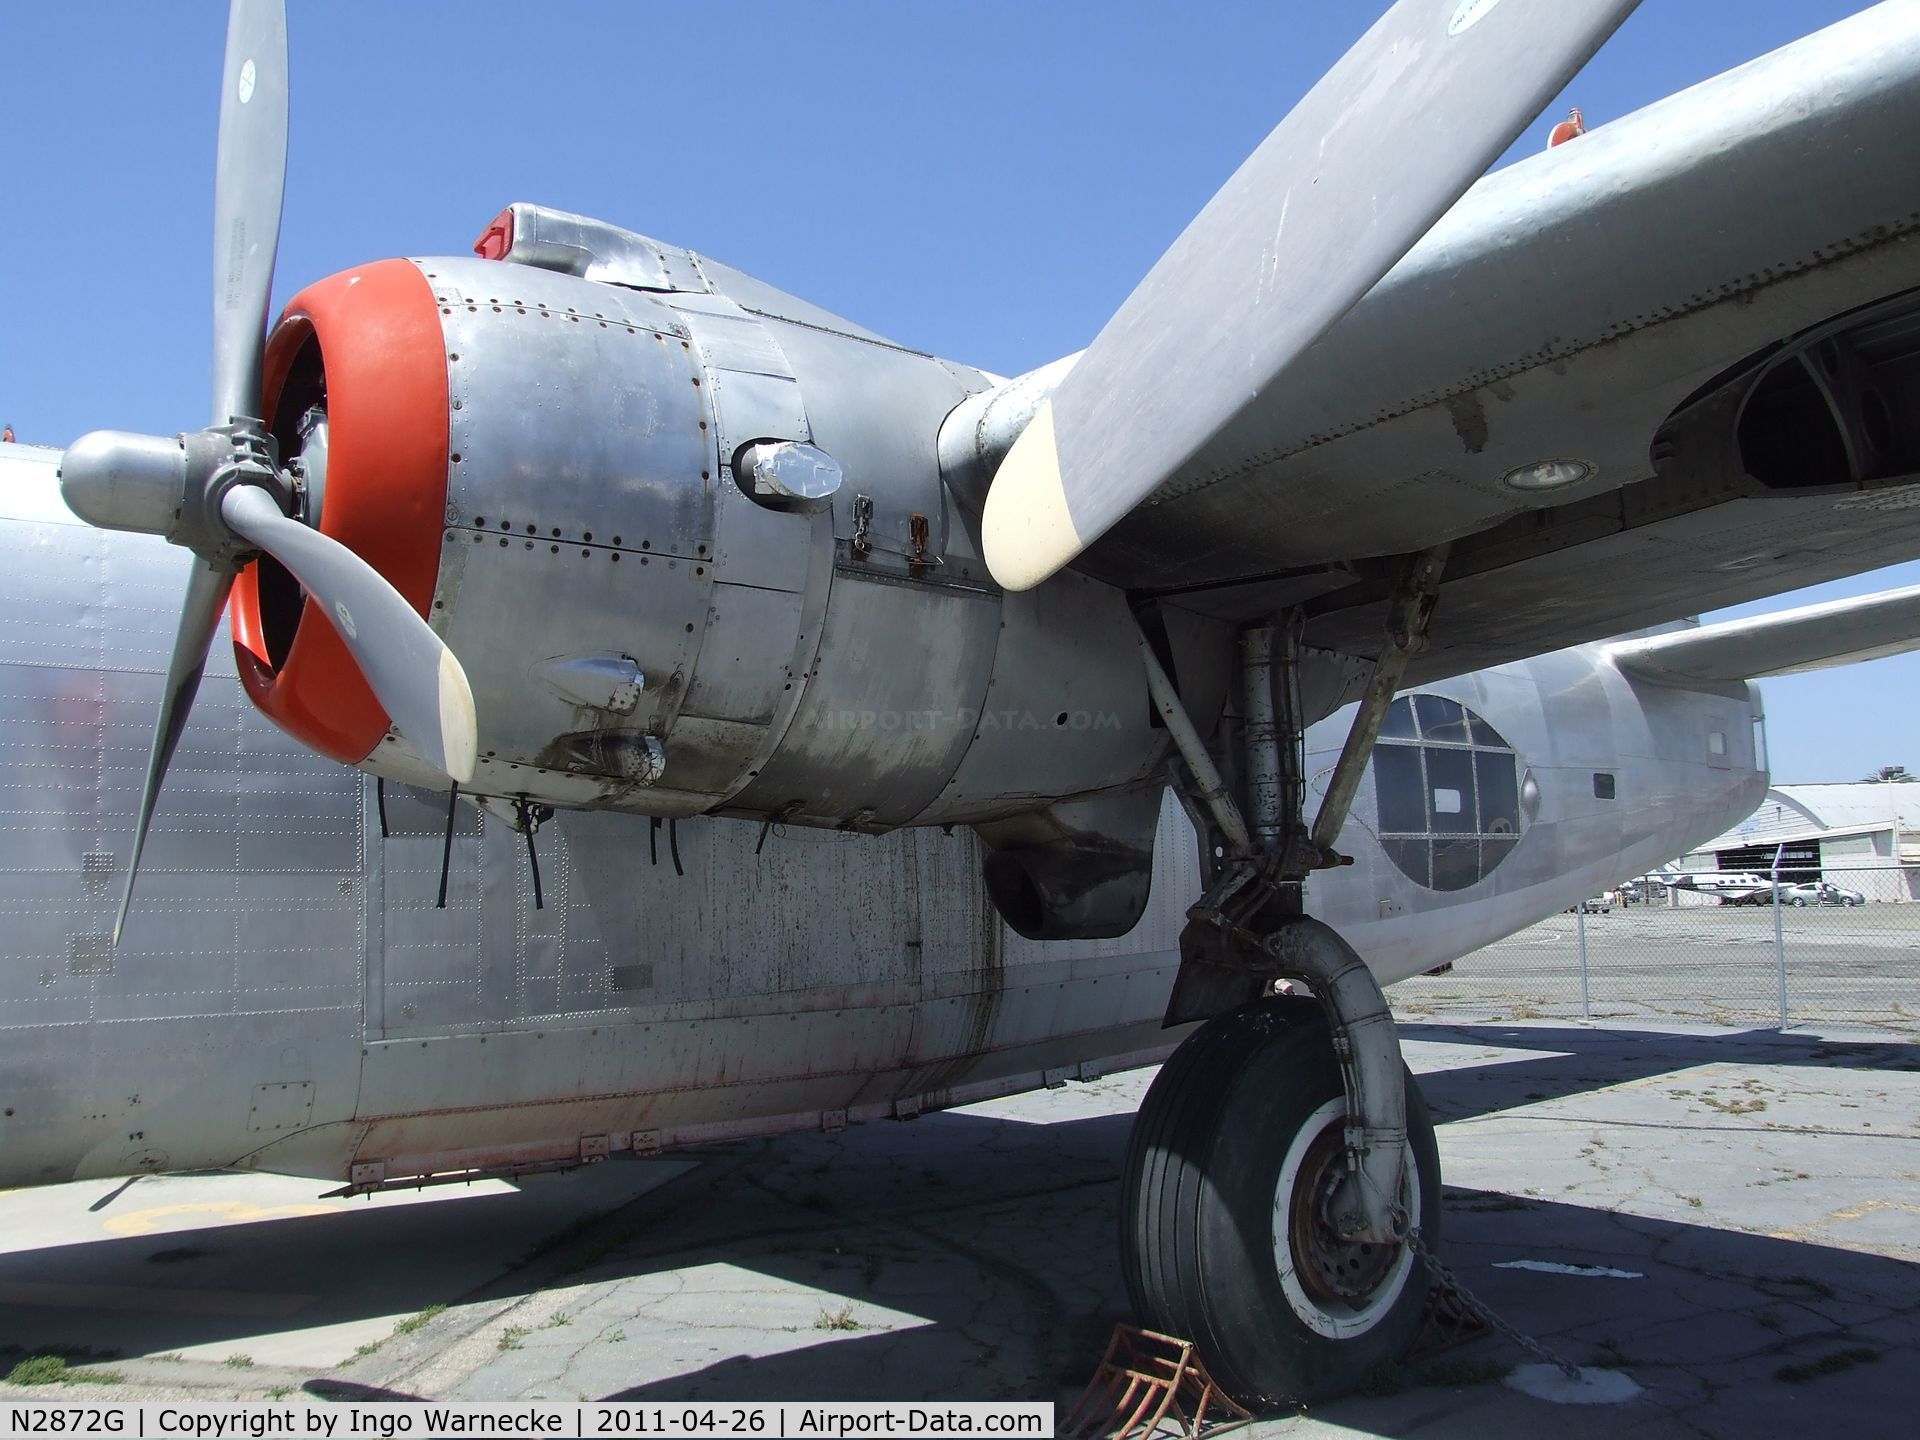 N2872G, Consolidated Vultee P4Y-2 Privateer C/N 66300, Consolidated PB4Y-2G Privateer (converted to water-bomber) at the Yanks Air Museum, Chino CA